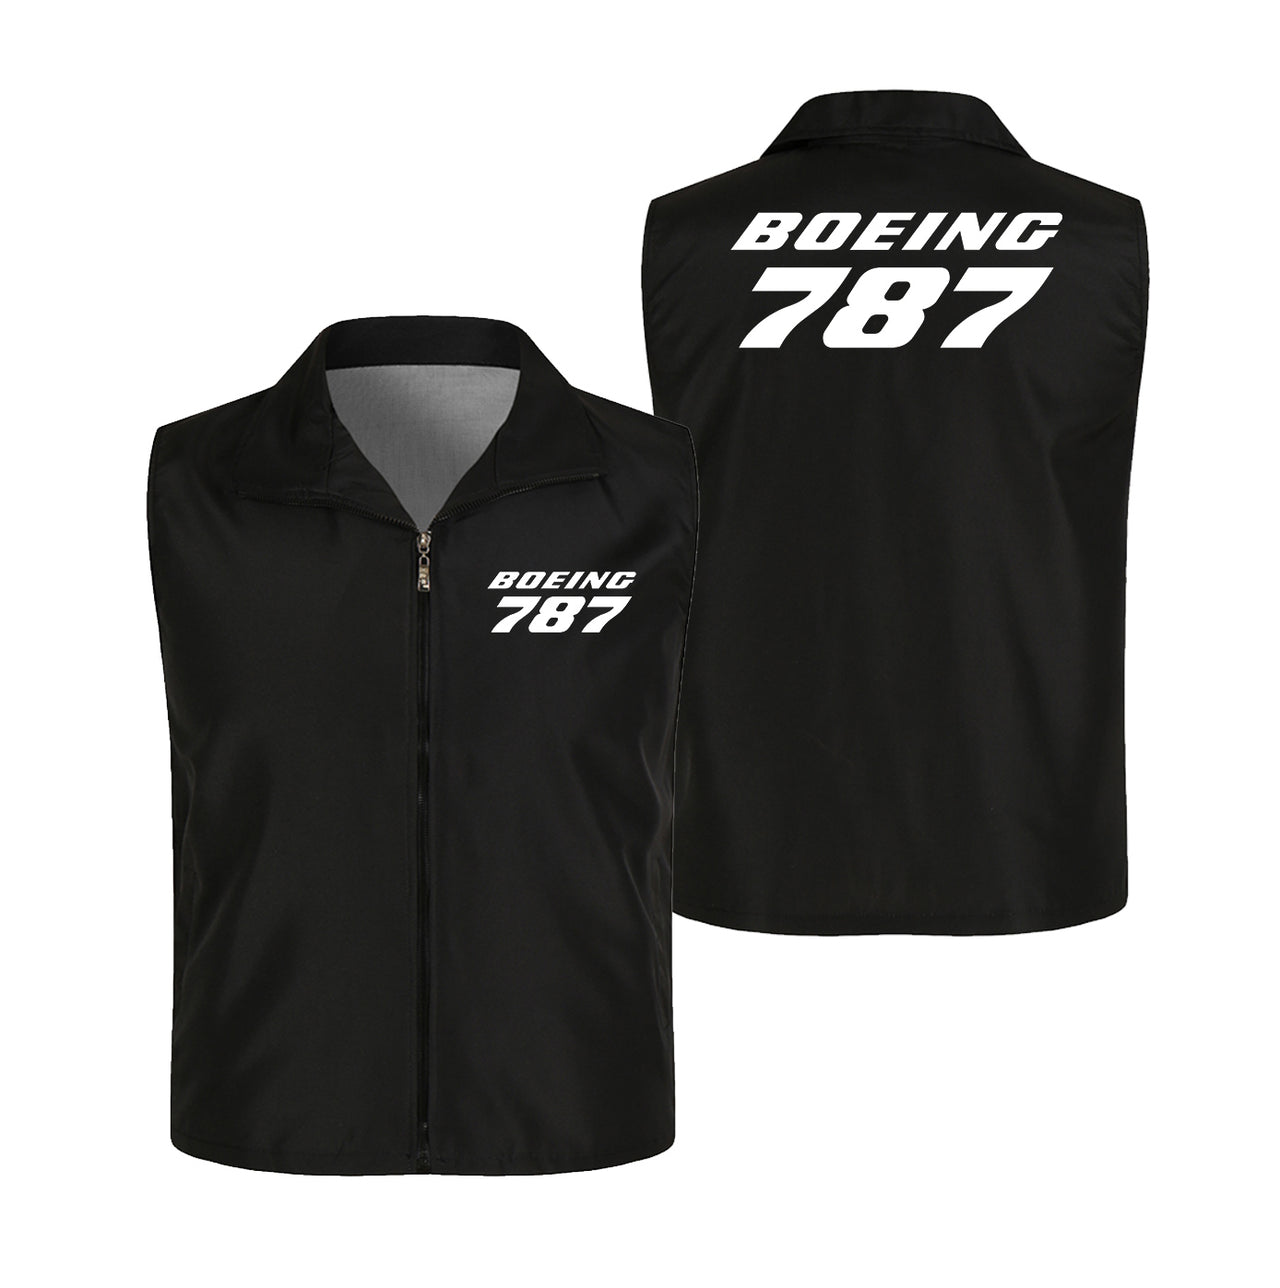 Boeing 787 & Text Designed Thin Style Vests